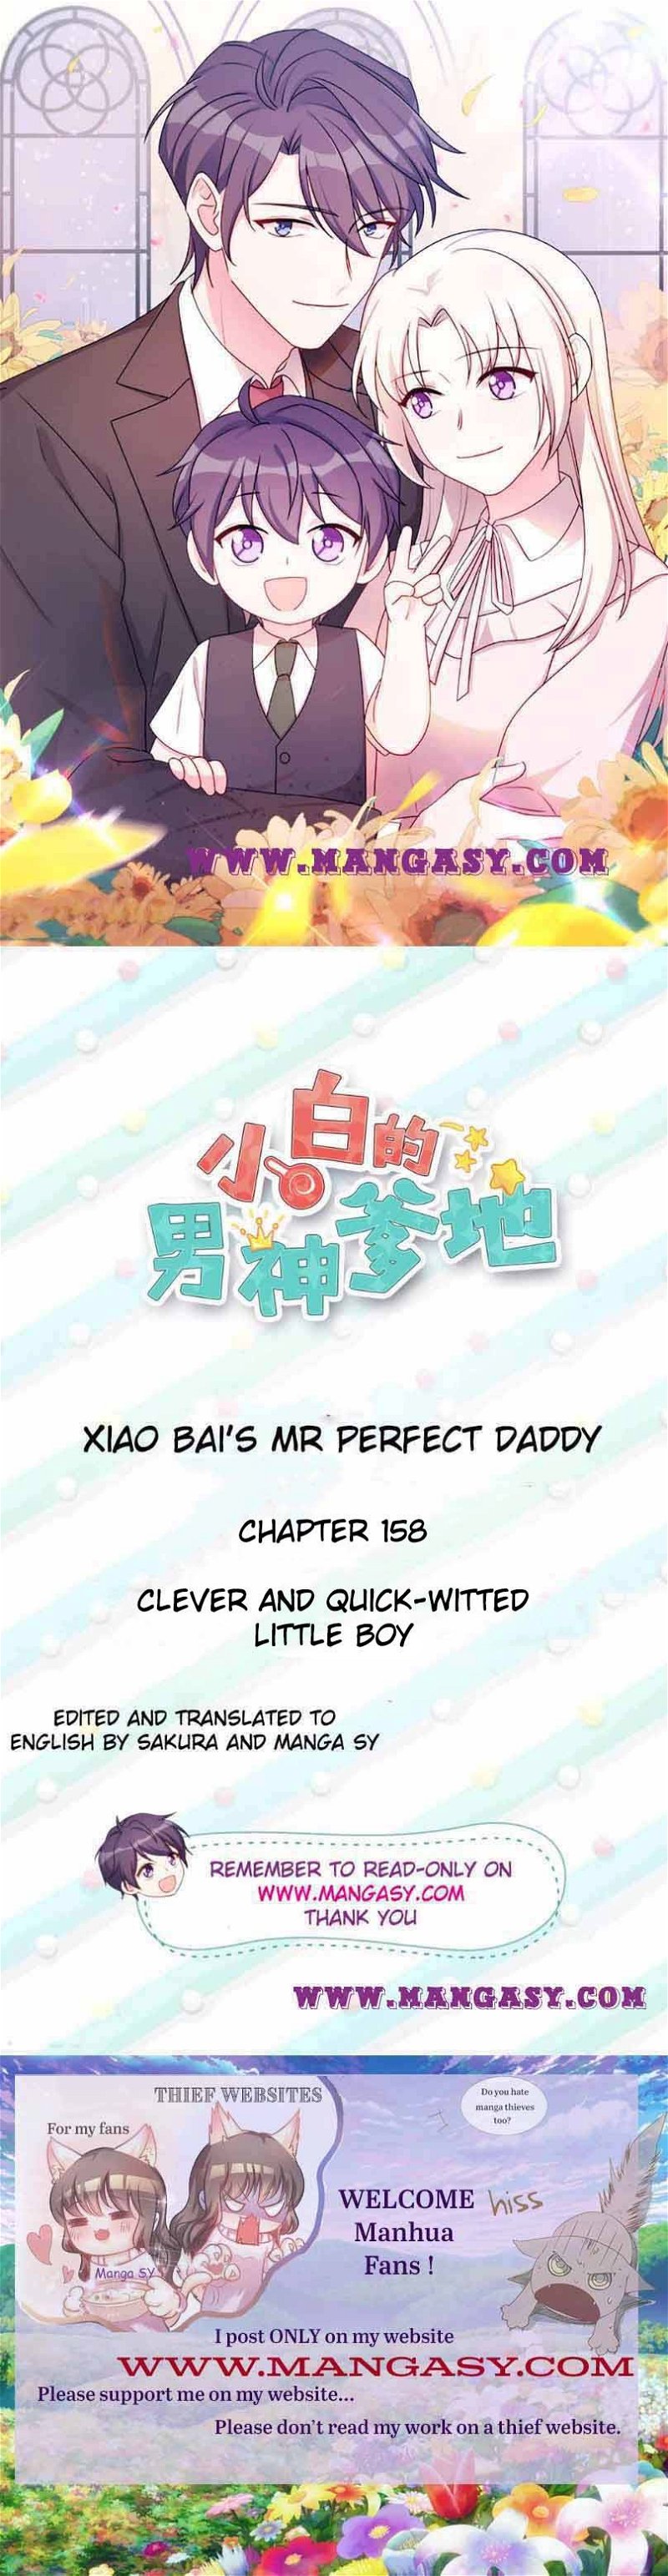 Xiao Bai’s father is a wonderful person Chapter 158 - Page 0